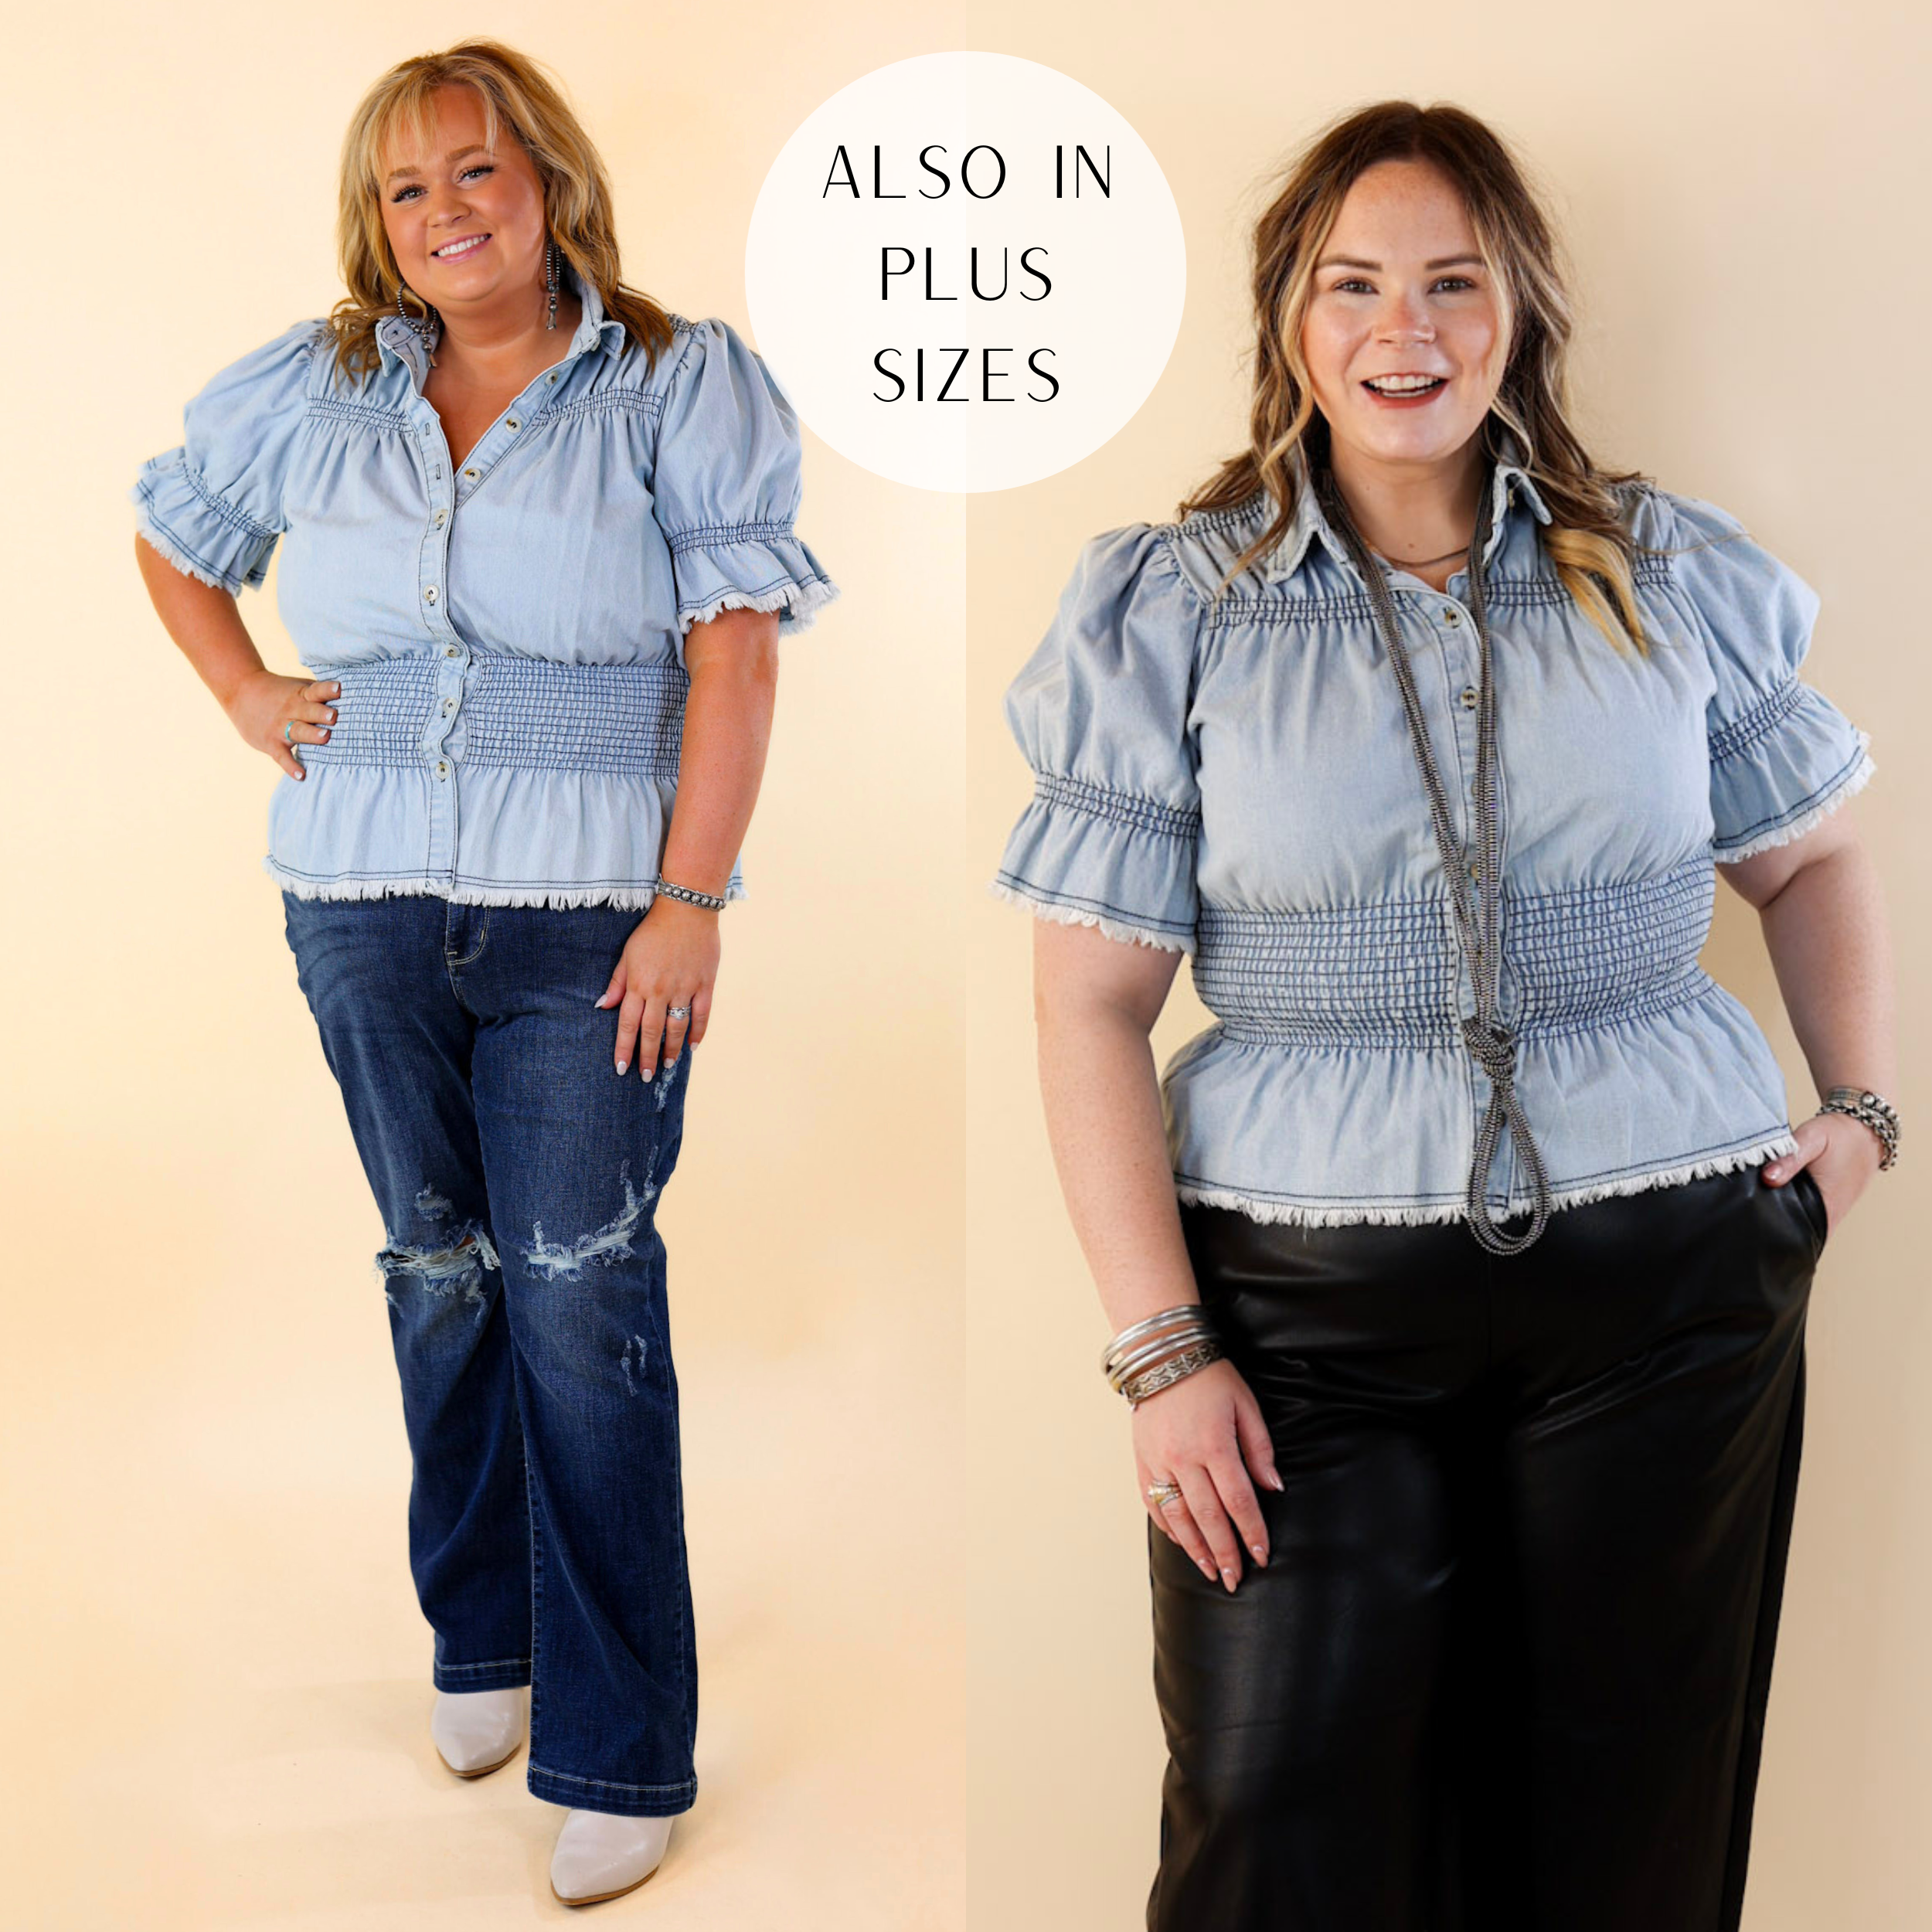 Models are wearing a button up denim peplum top with short balloon sleeves and a raw hem around the waist and sleeves. Plus size model has it paired with dark wash jeans, white booties, and silver jewelry. Size large model has it paired with black pants and silver jewelry.